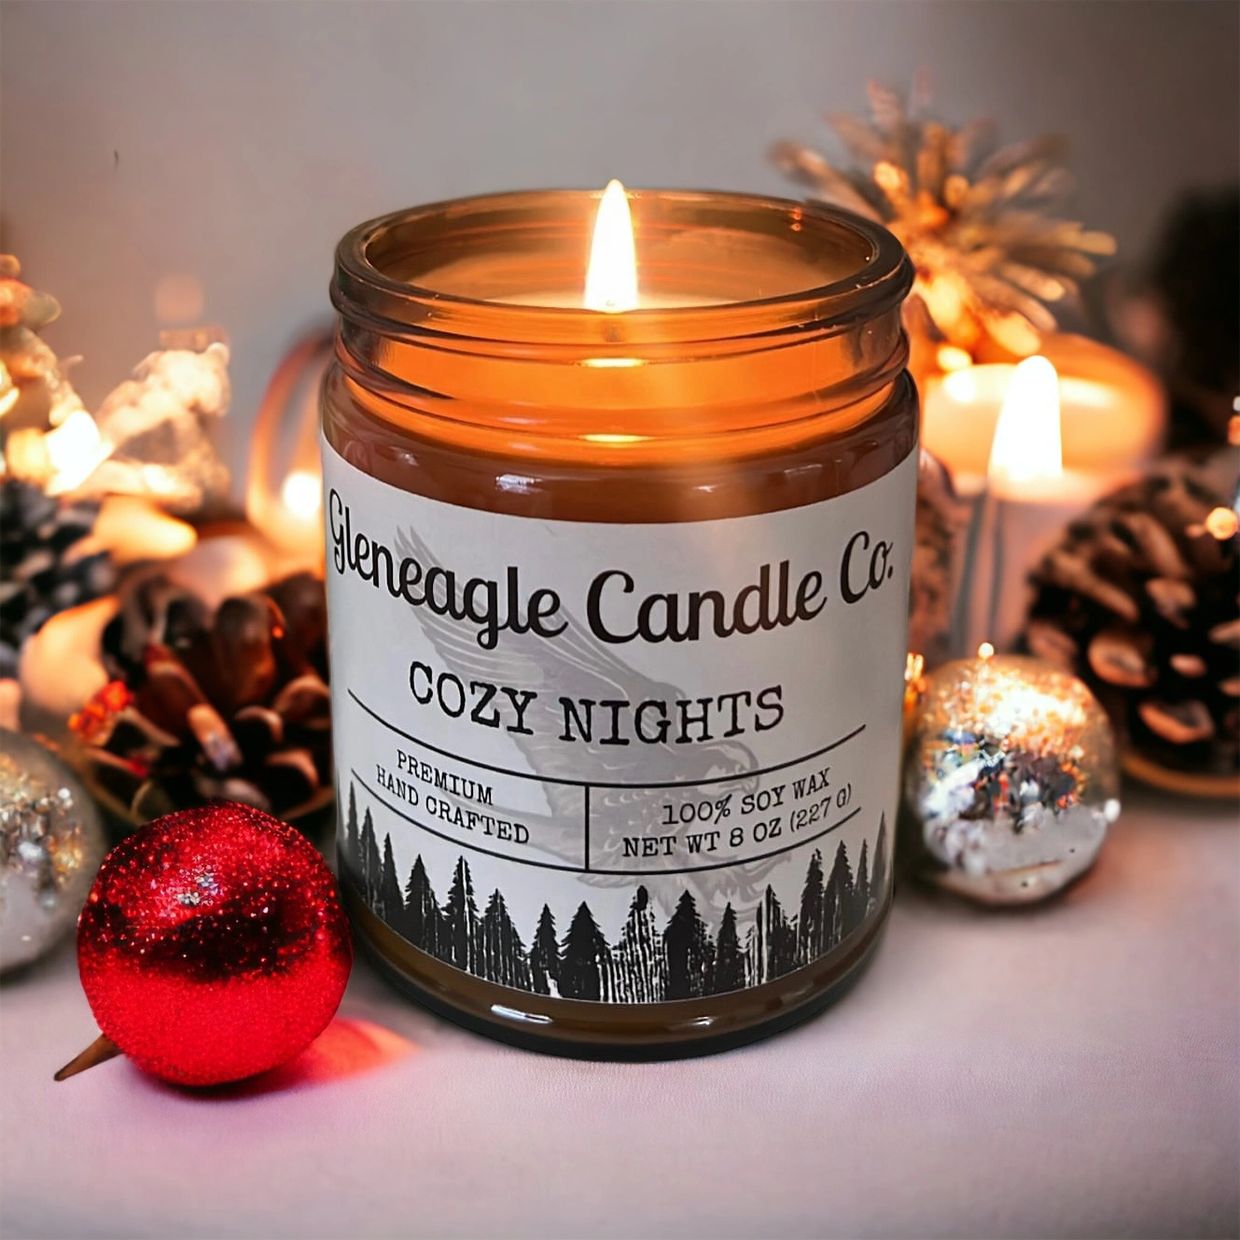 A cozy candle surrounded by holiday ornaments 